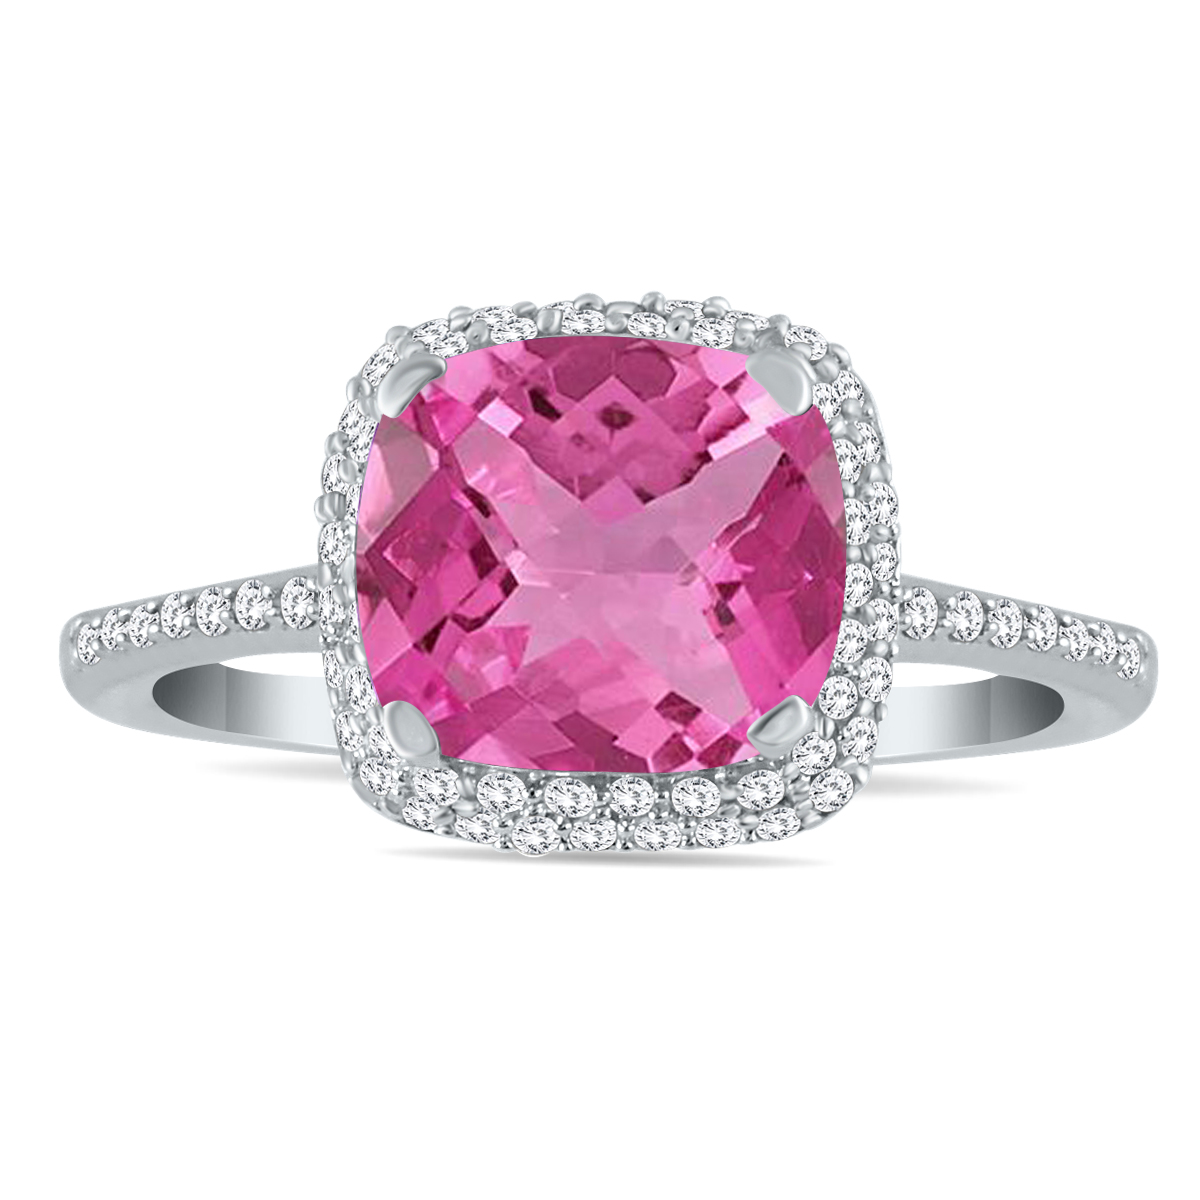 Cushion Cut Pink Topaz and Diamond Halo Ring in 10K White Gold